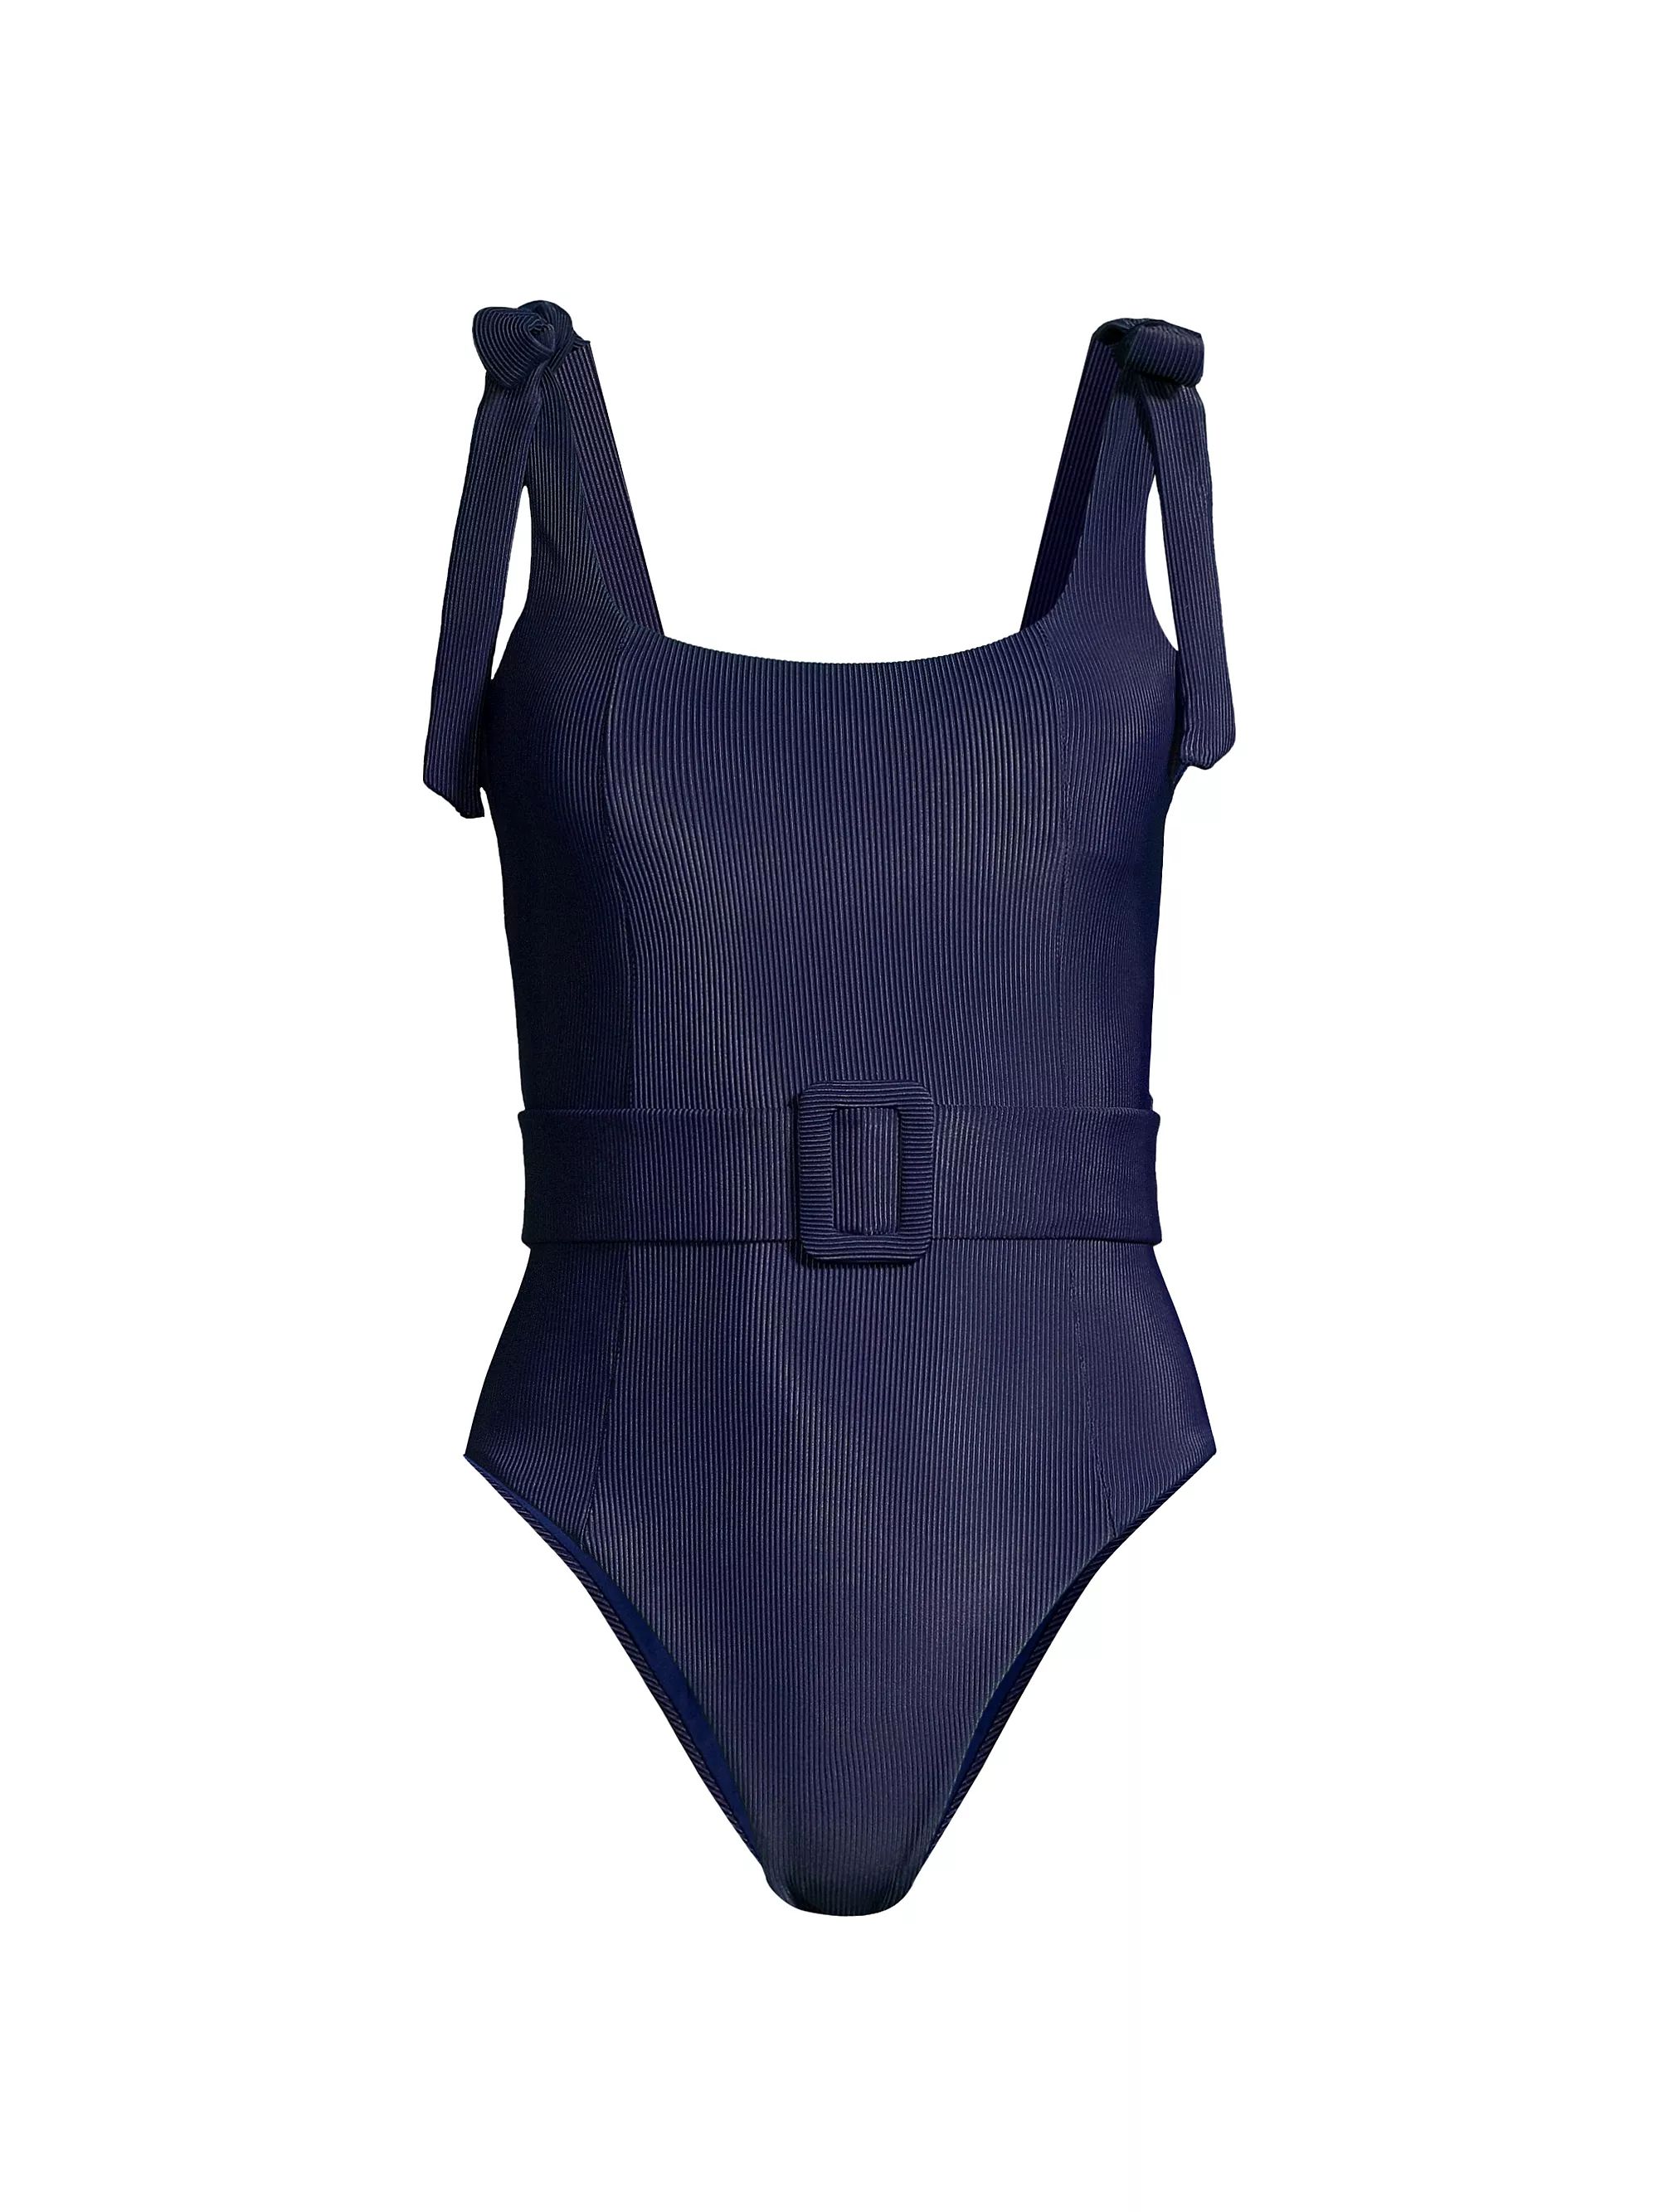 Sydney Ribbed One-Piece Swimsuit | Saks Fifth Avenue